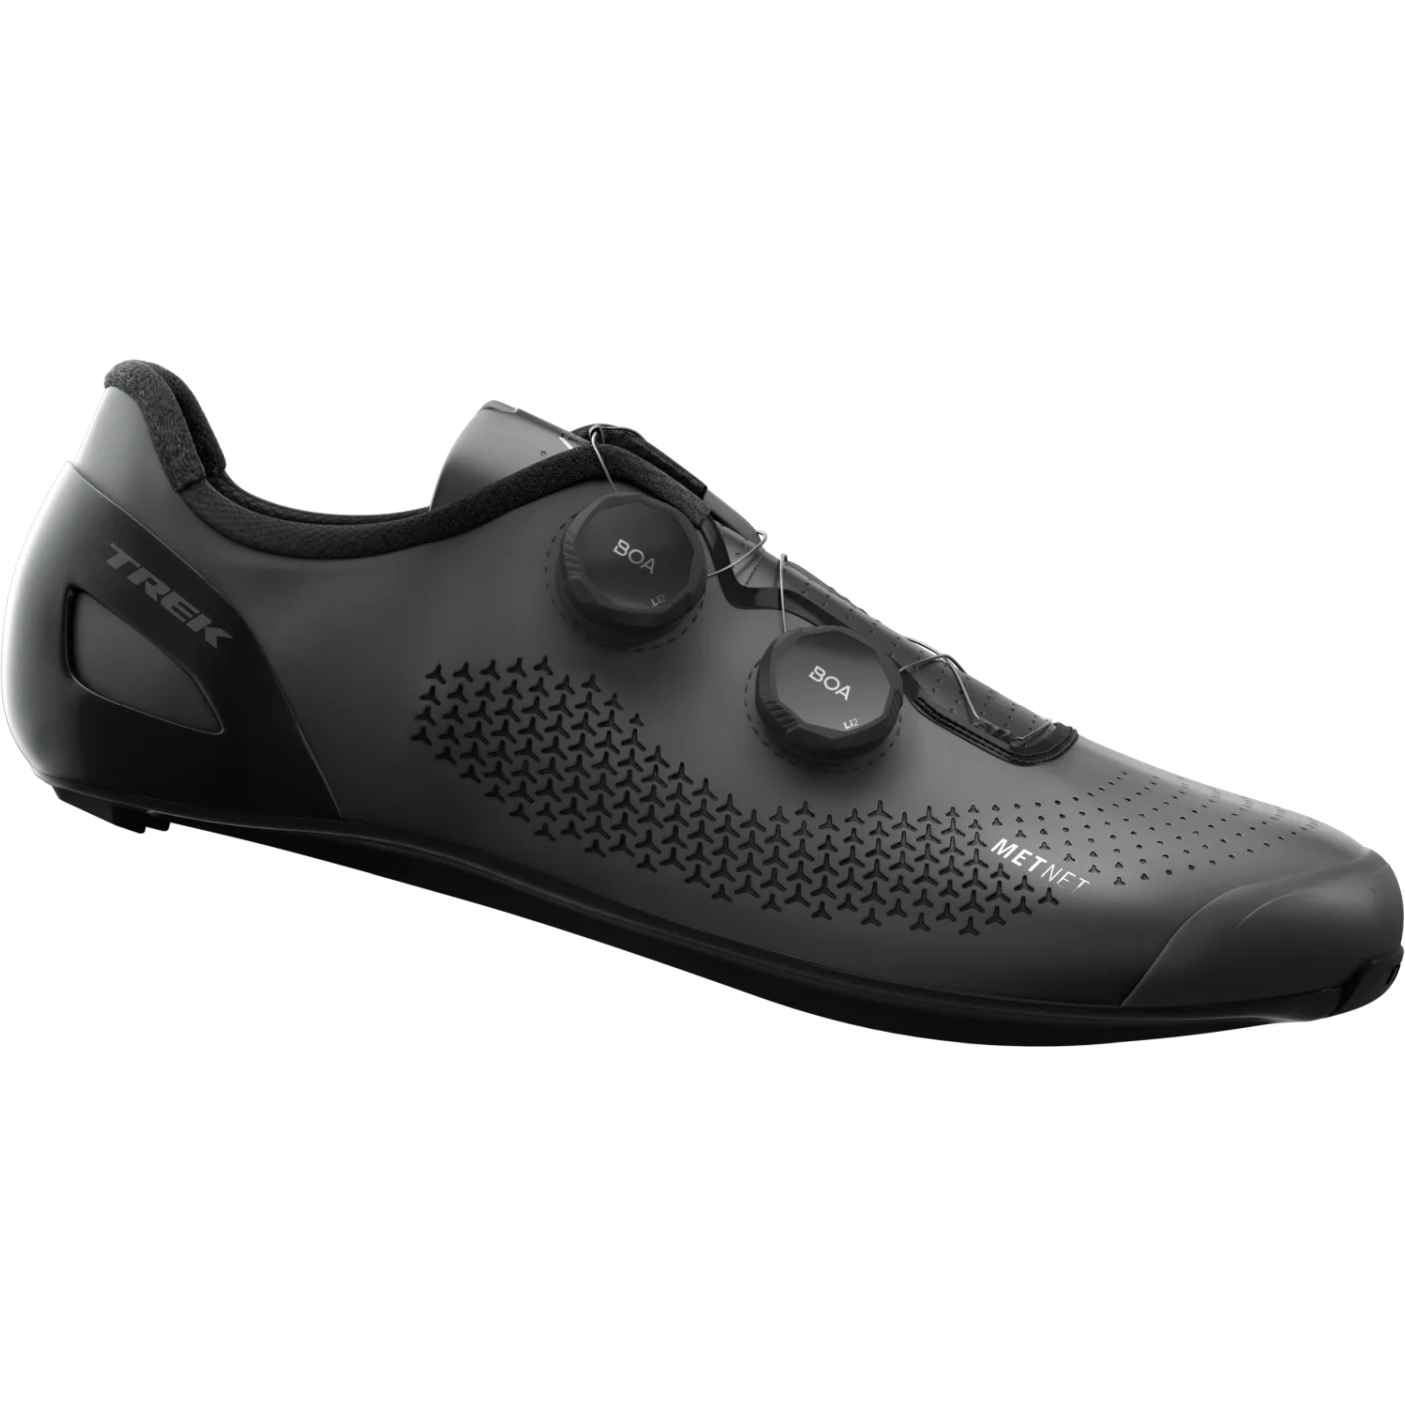 Picture of Trek RSL Road Cycling Shoes - Black